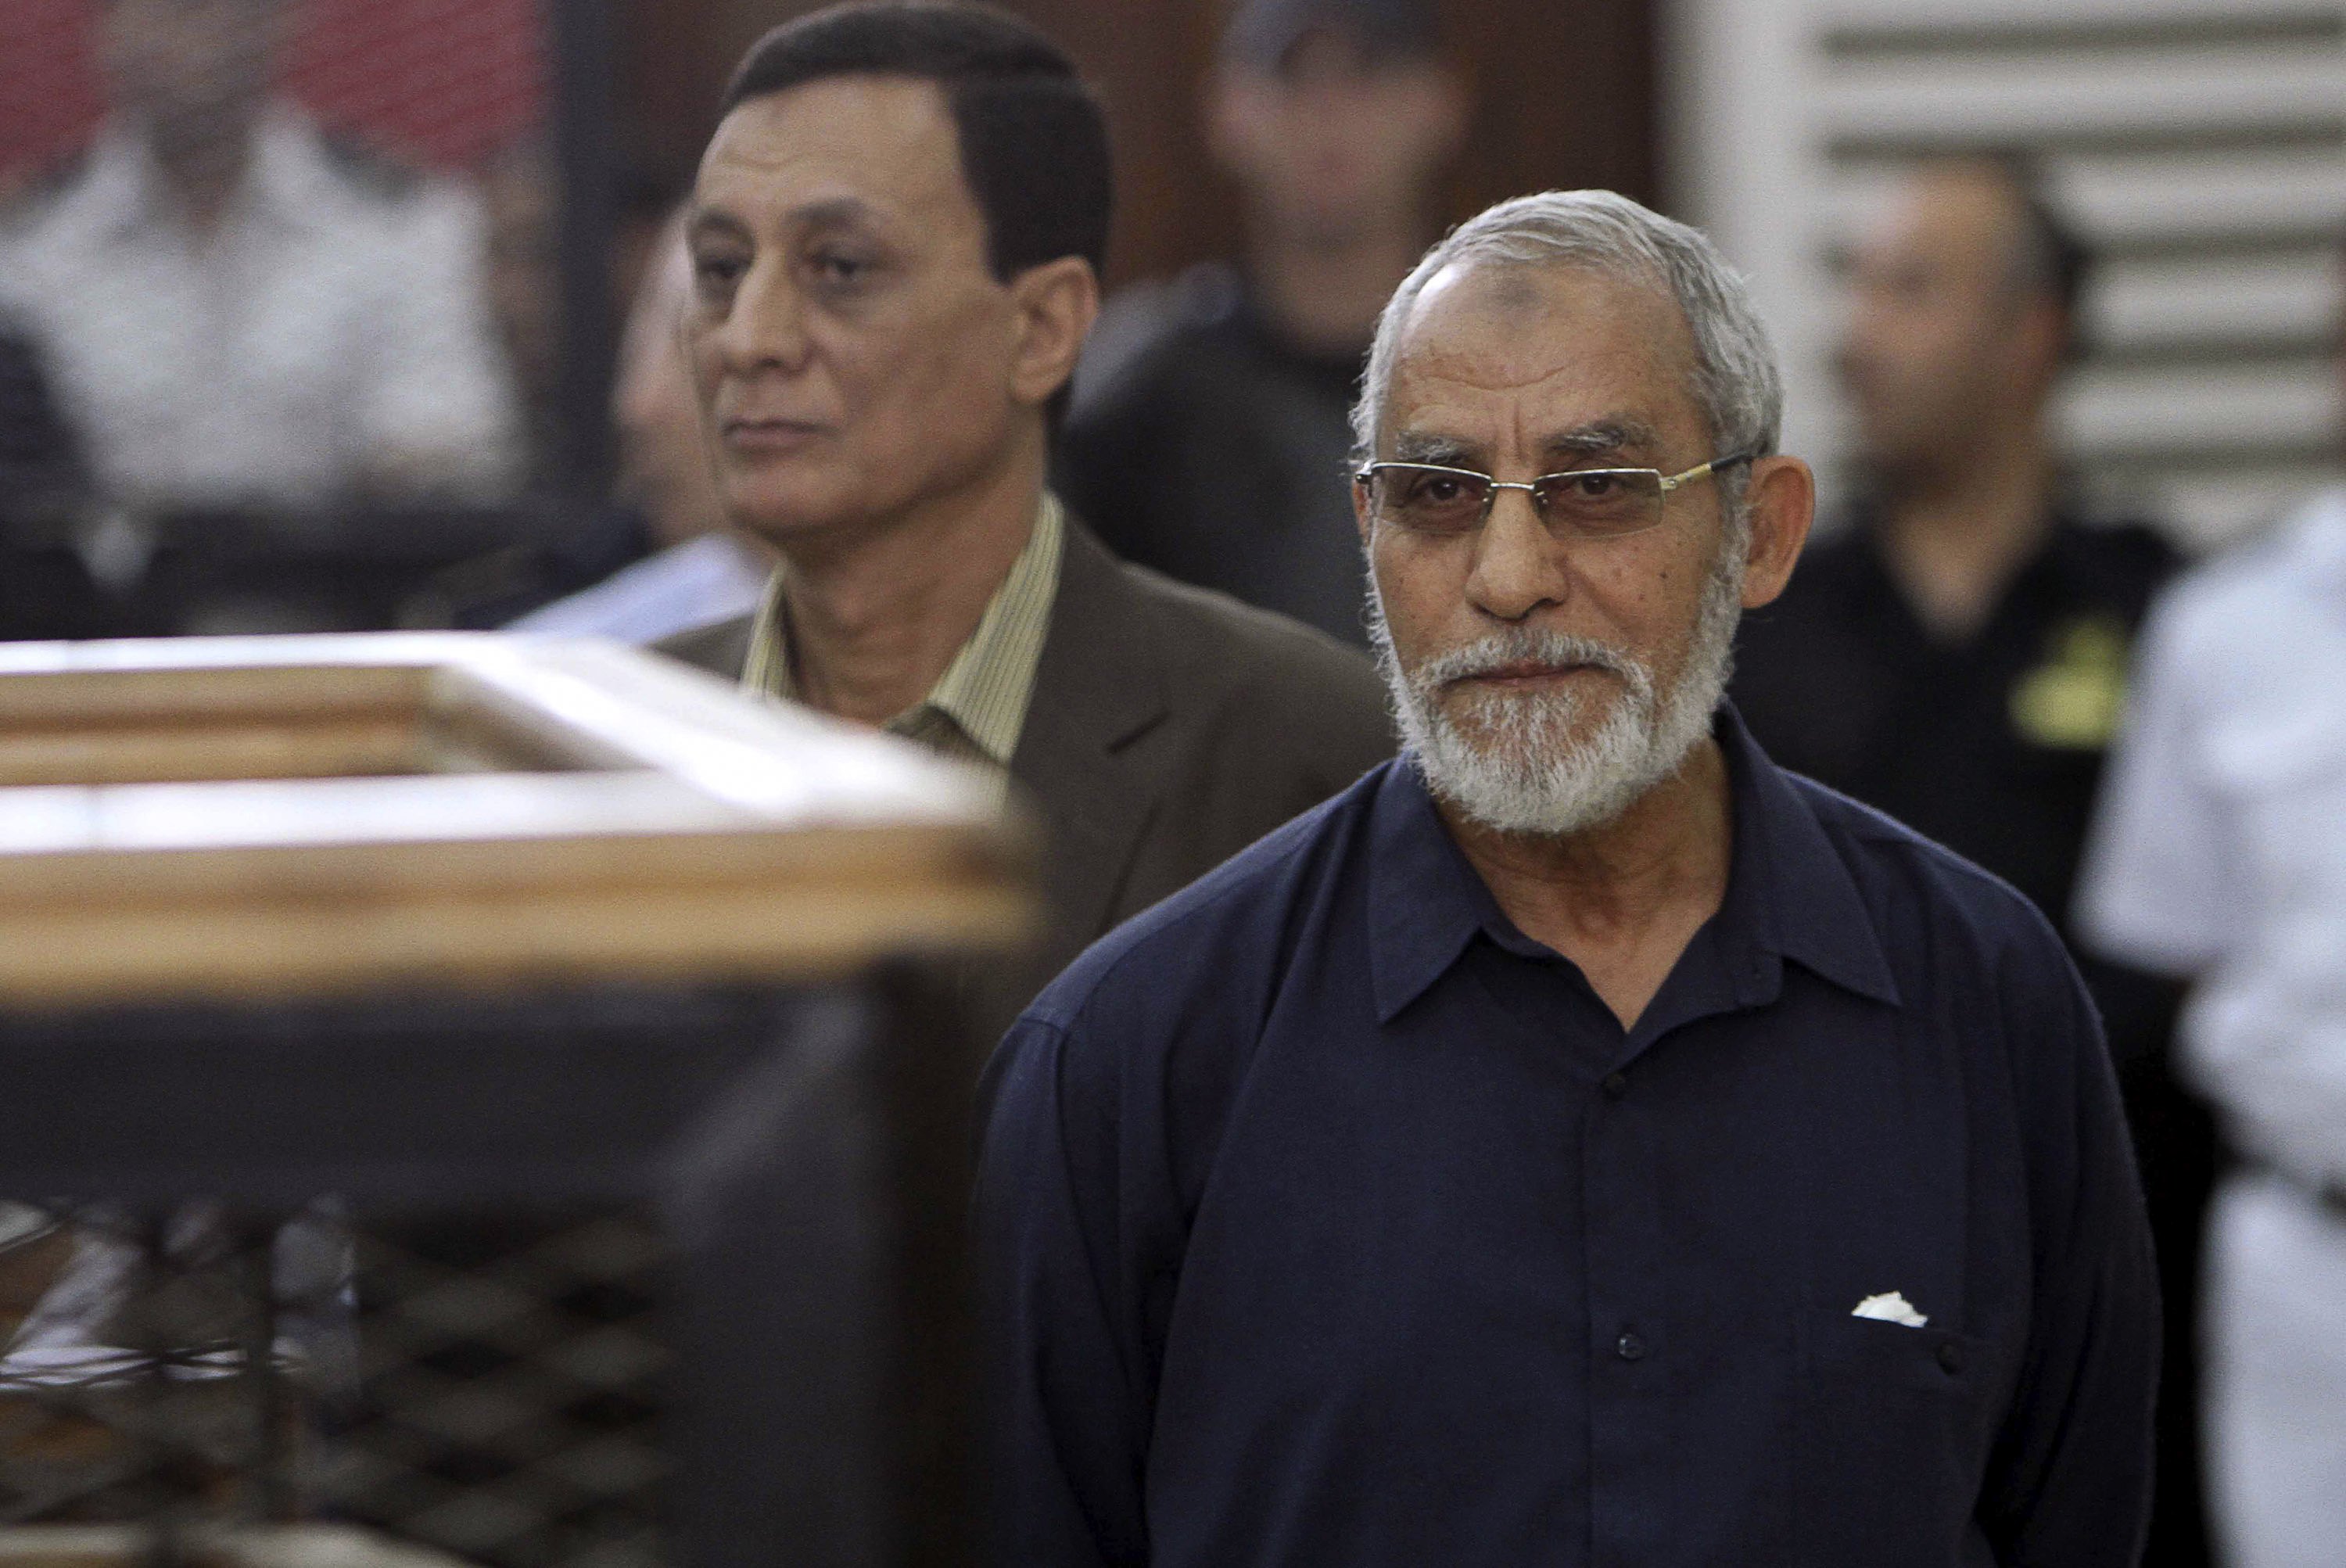 4 preliminarily sentenced to death in Brotherhood leaders' trial over inciting violence